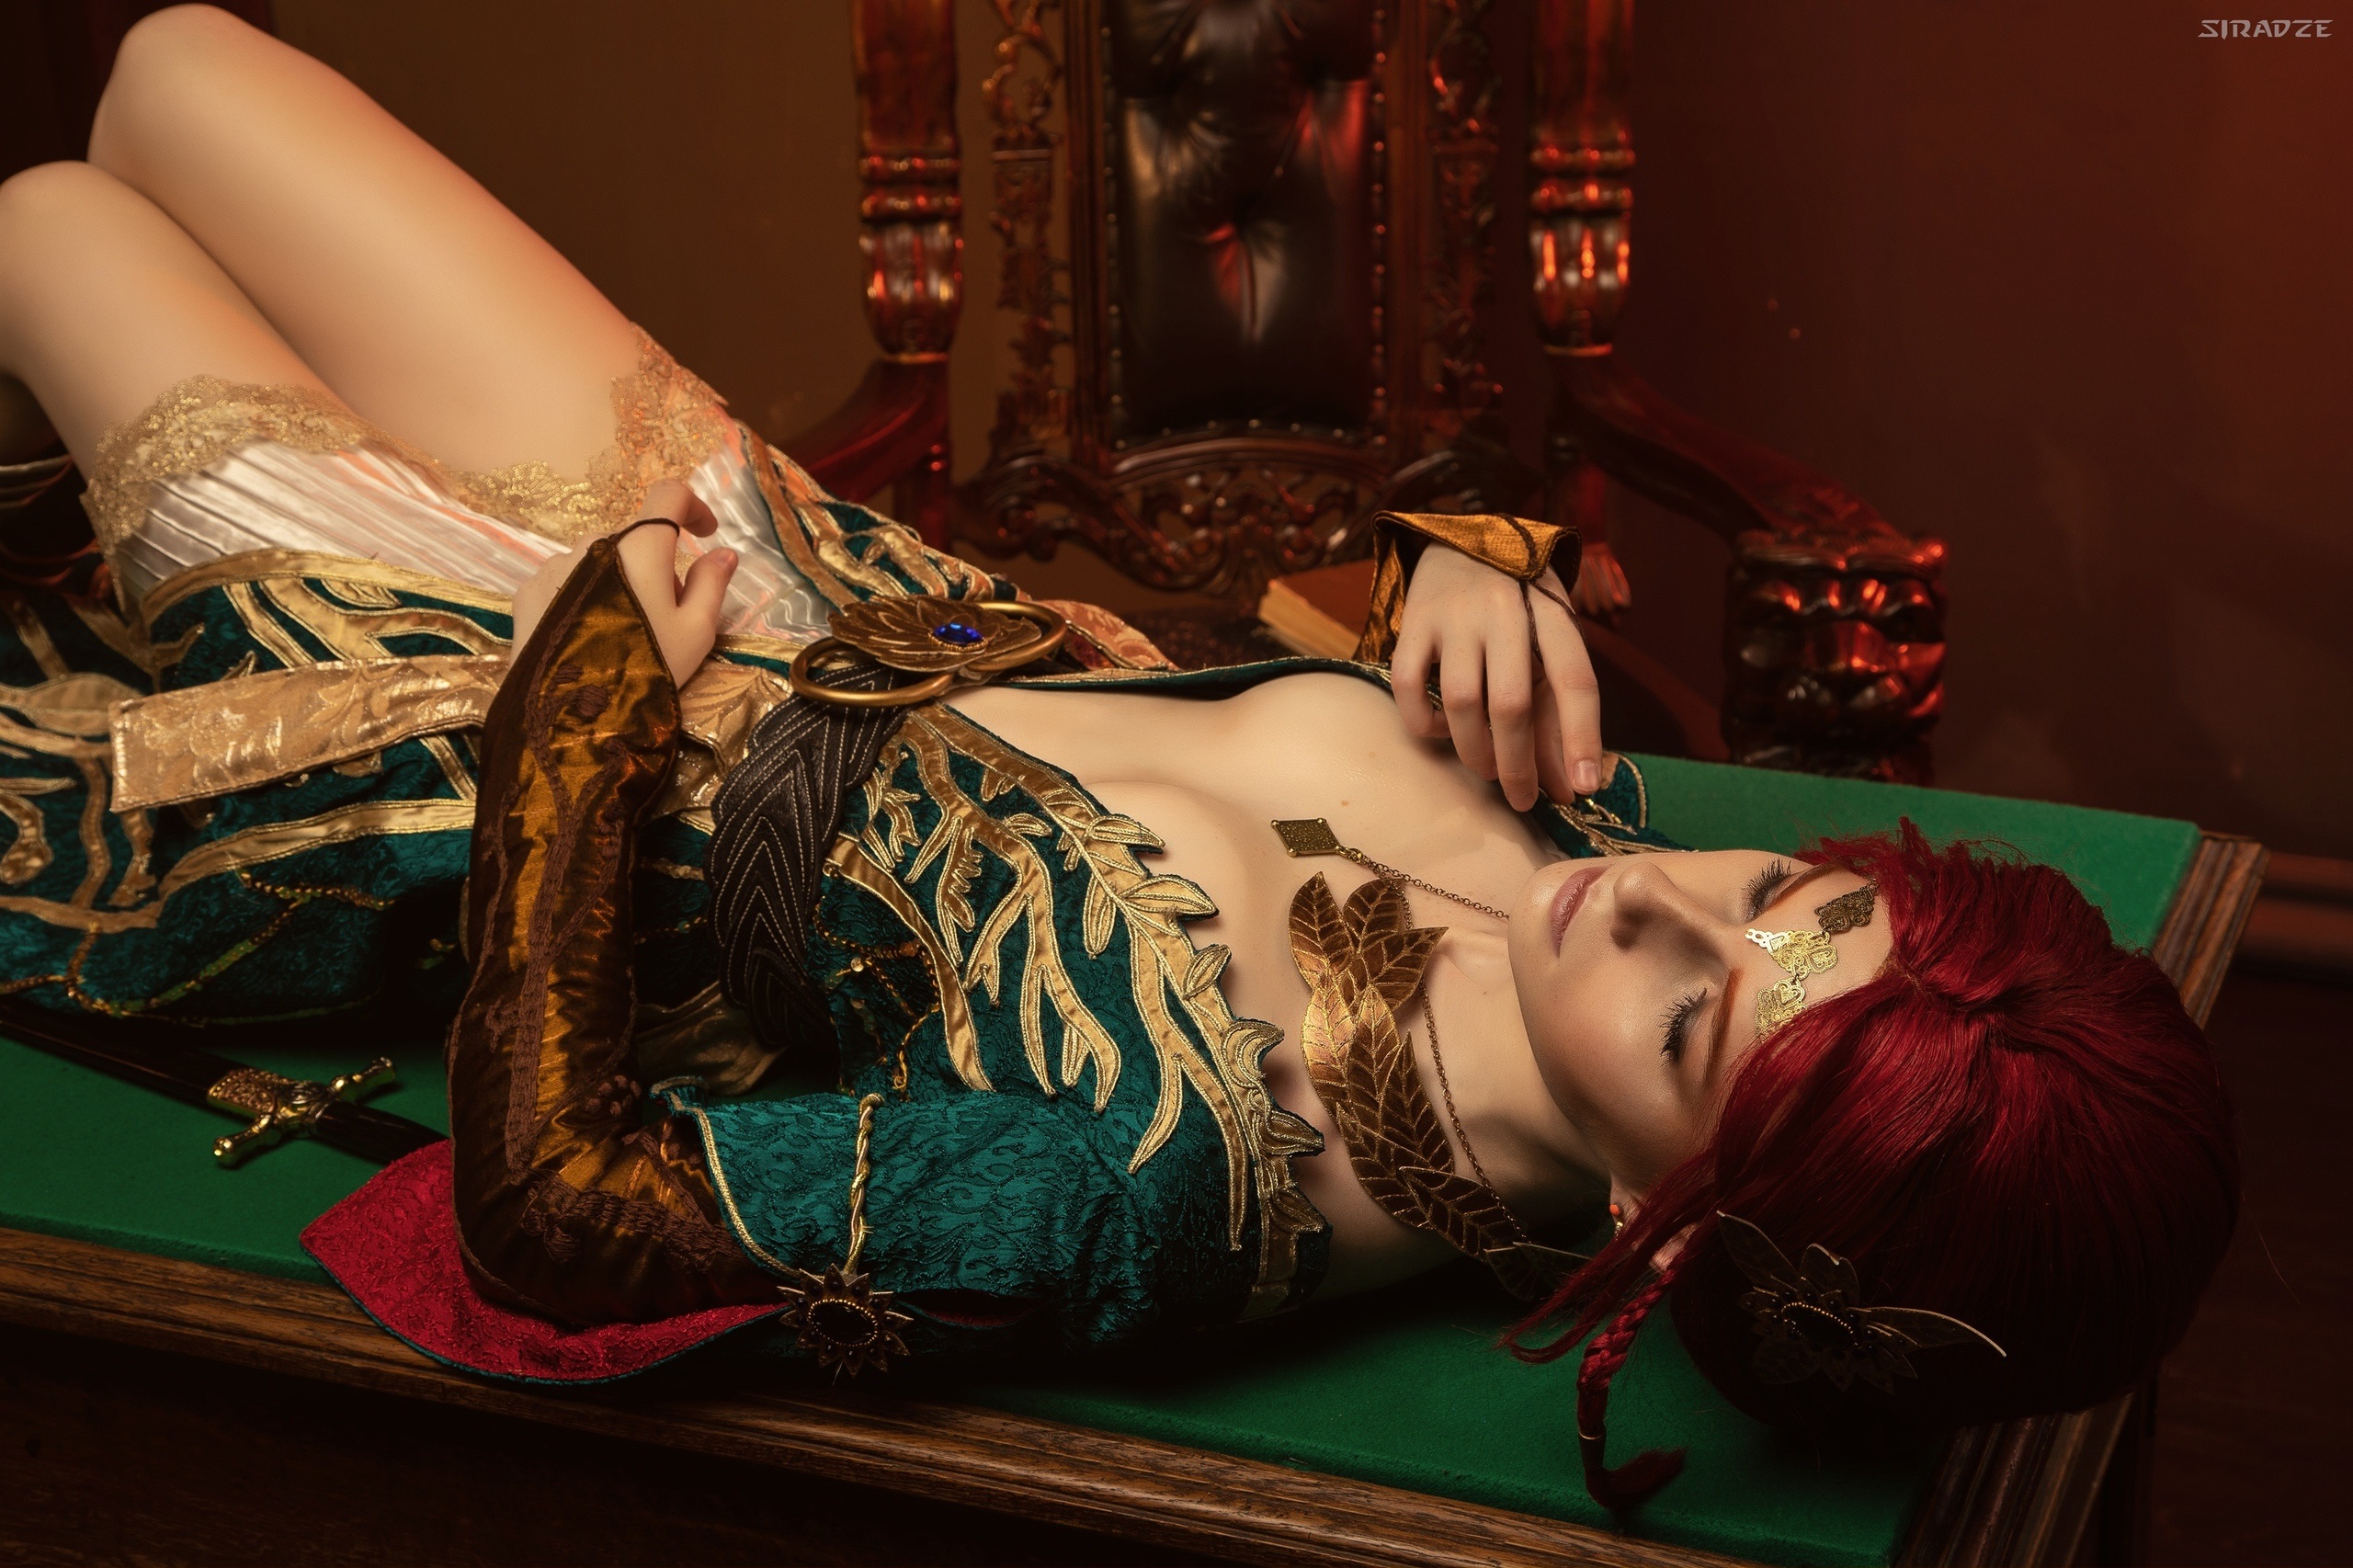 People 2560x1706 Triss Merigold The Witcher cosplay women redhead fantasy girl boobs necklace legs together women indoors model indoors costumes